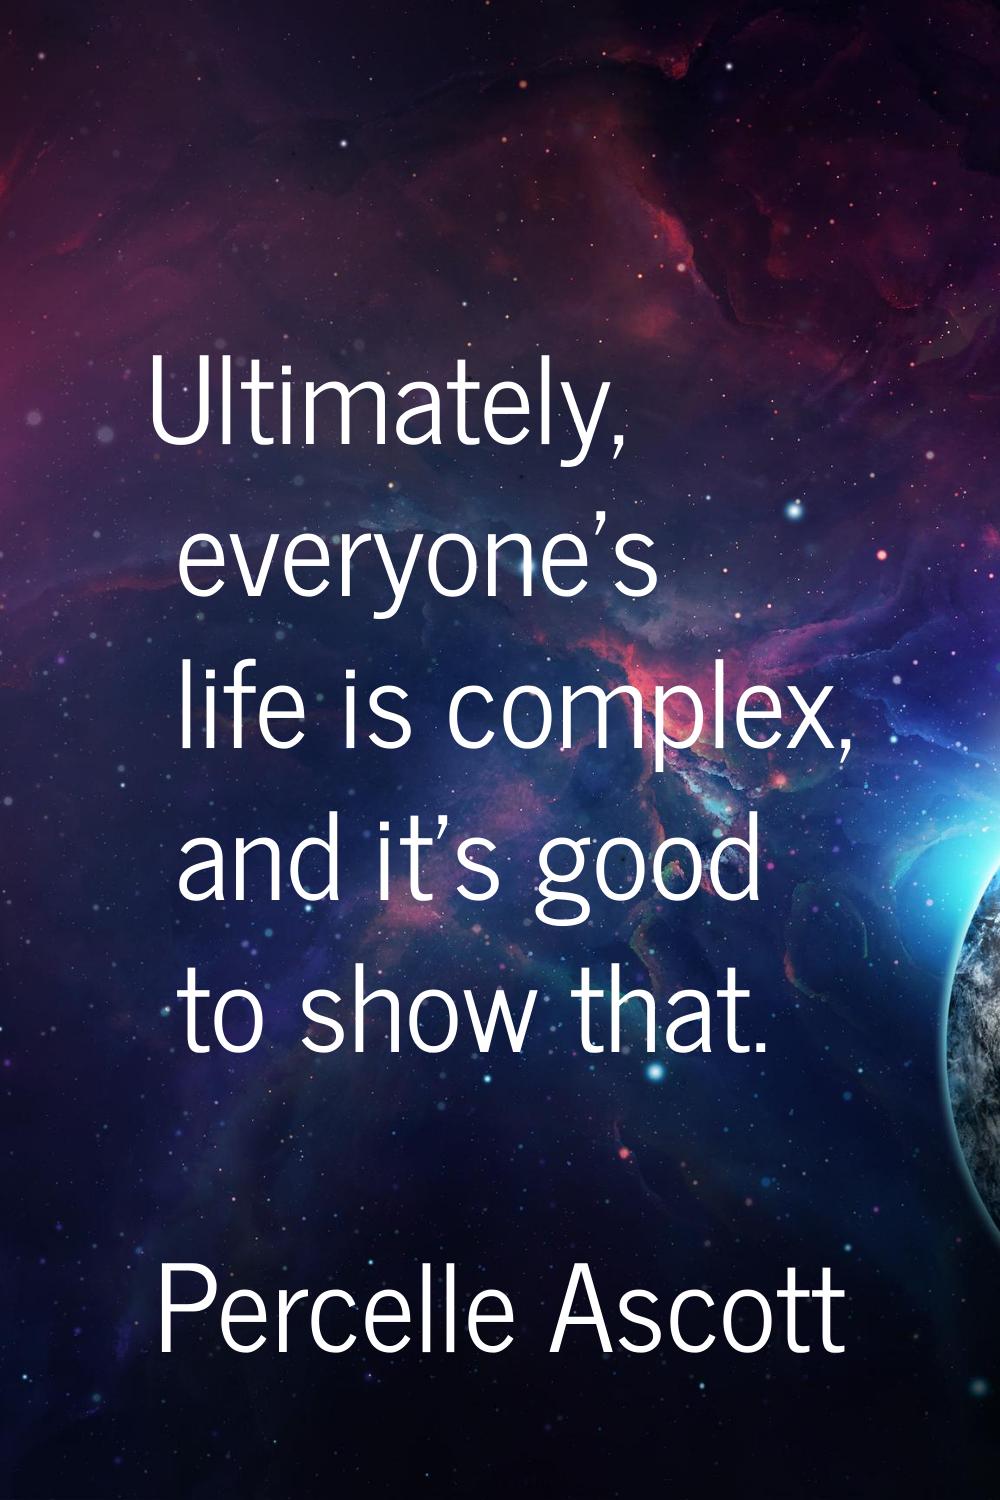 Ultimately, everyone's life is complex, and it's good to show that.